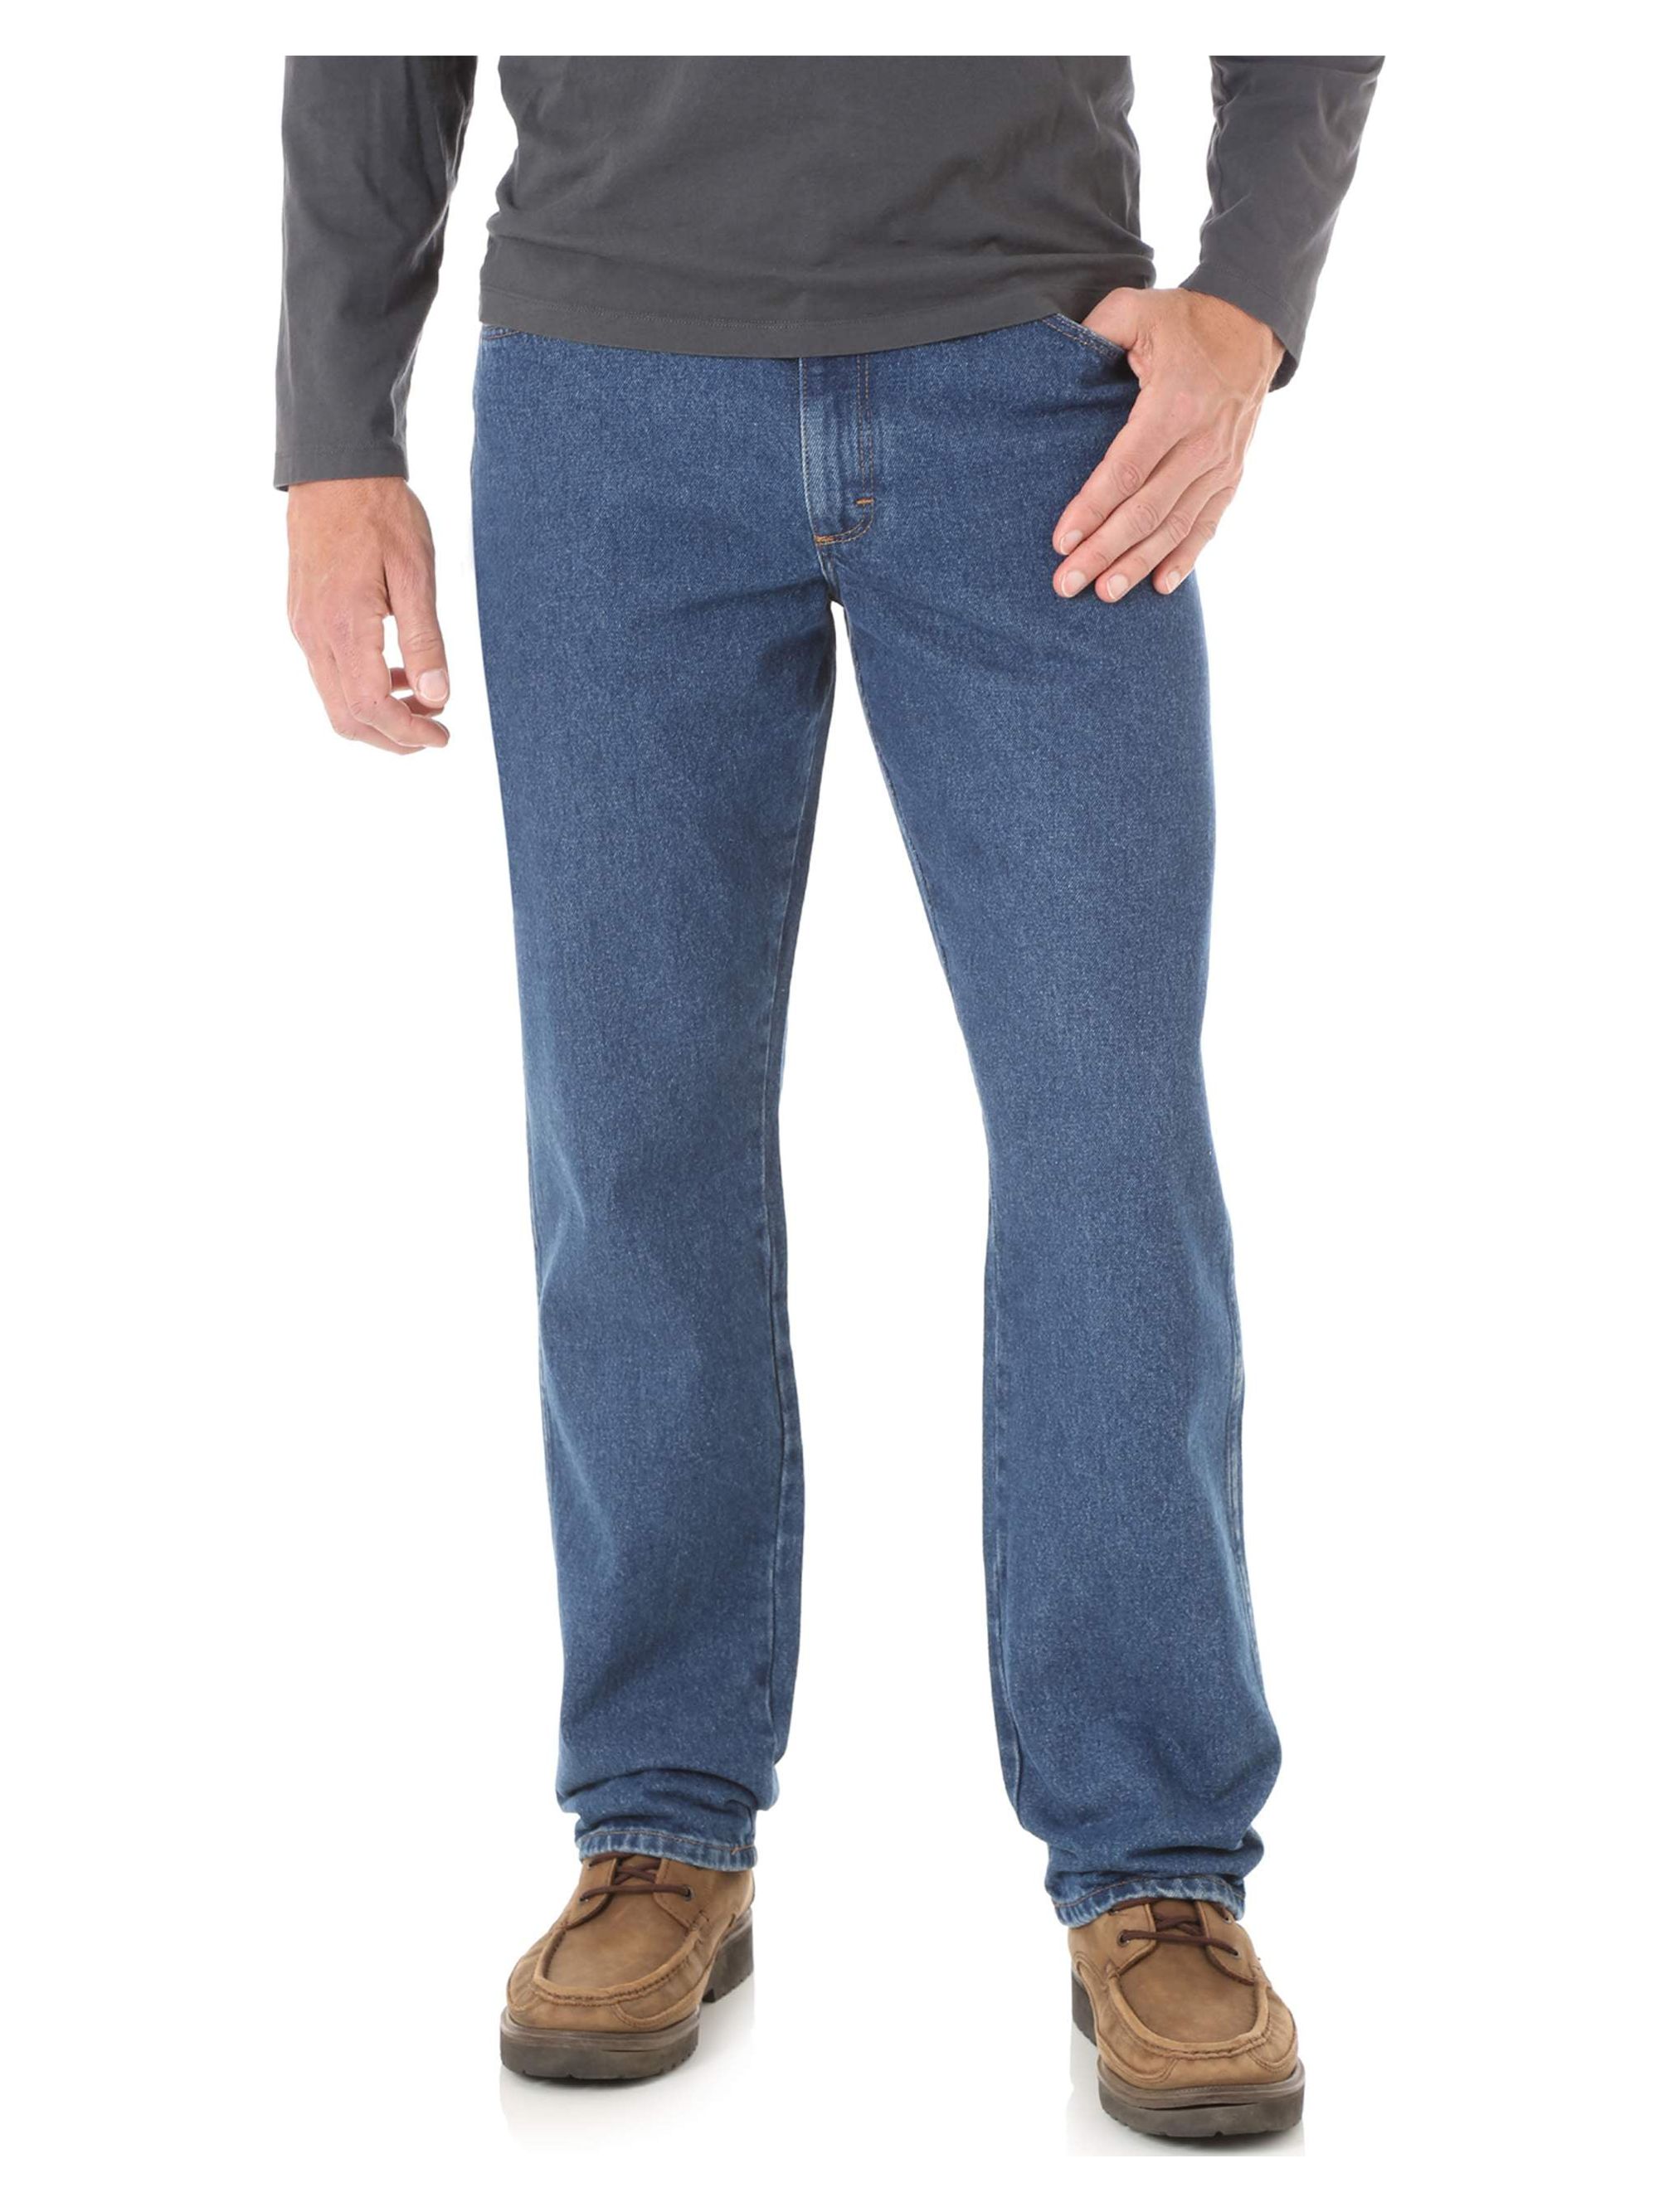 Wrangler Rustler Men's and Big Men's Relaxed Fit Jeans - image 1 of 5